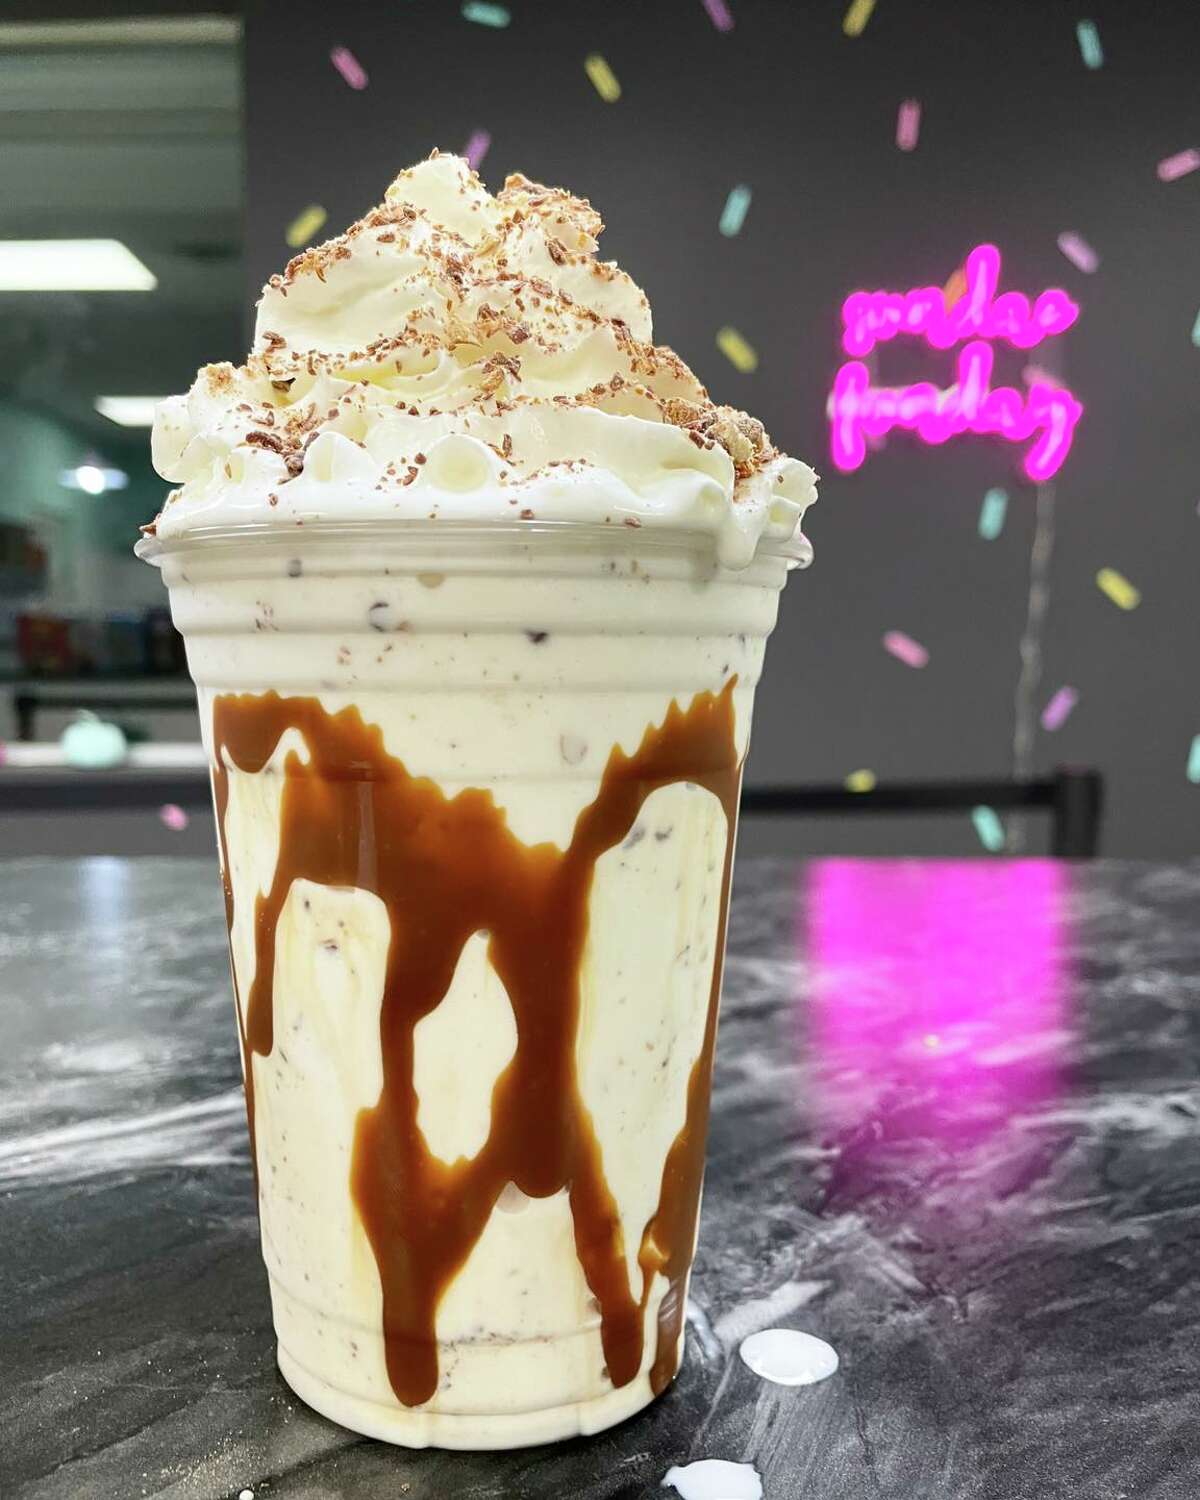 Sundae Funday opened its new Oxford storefront in late October.